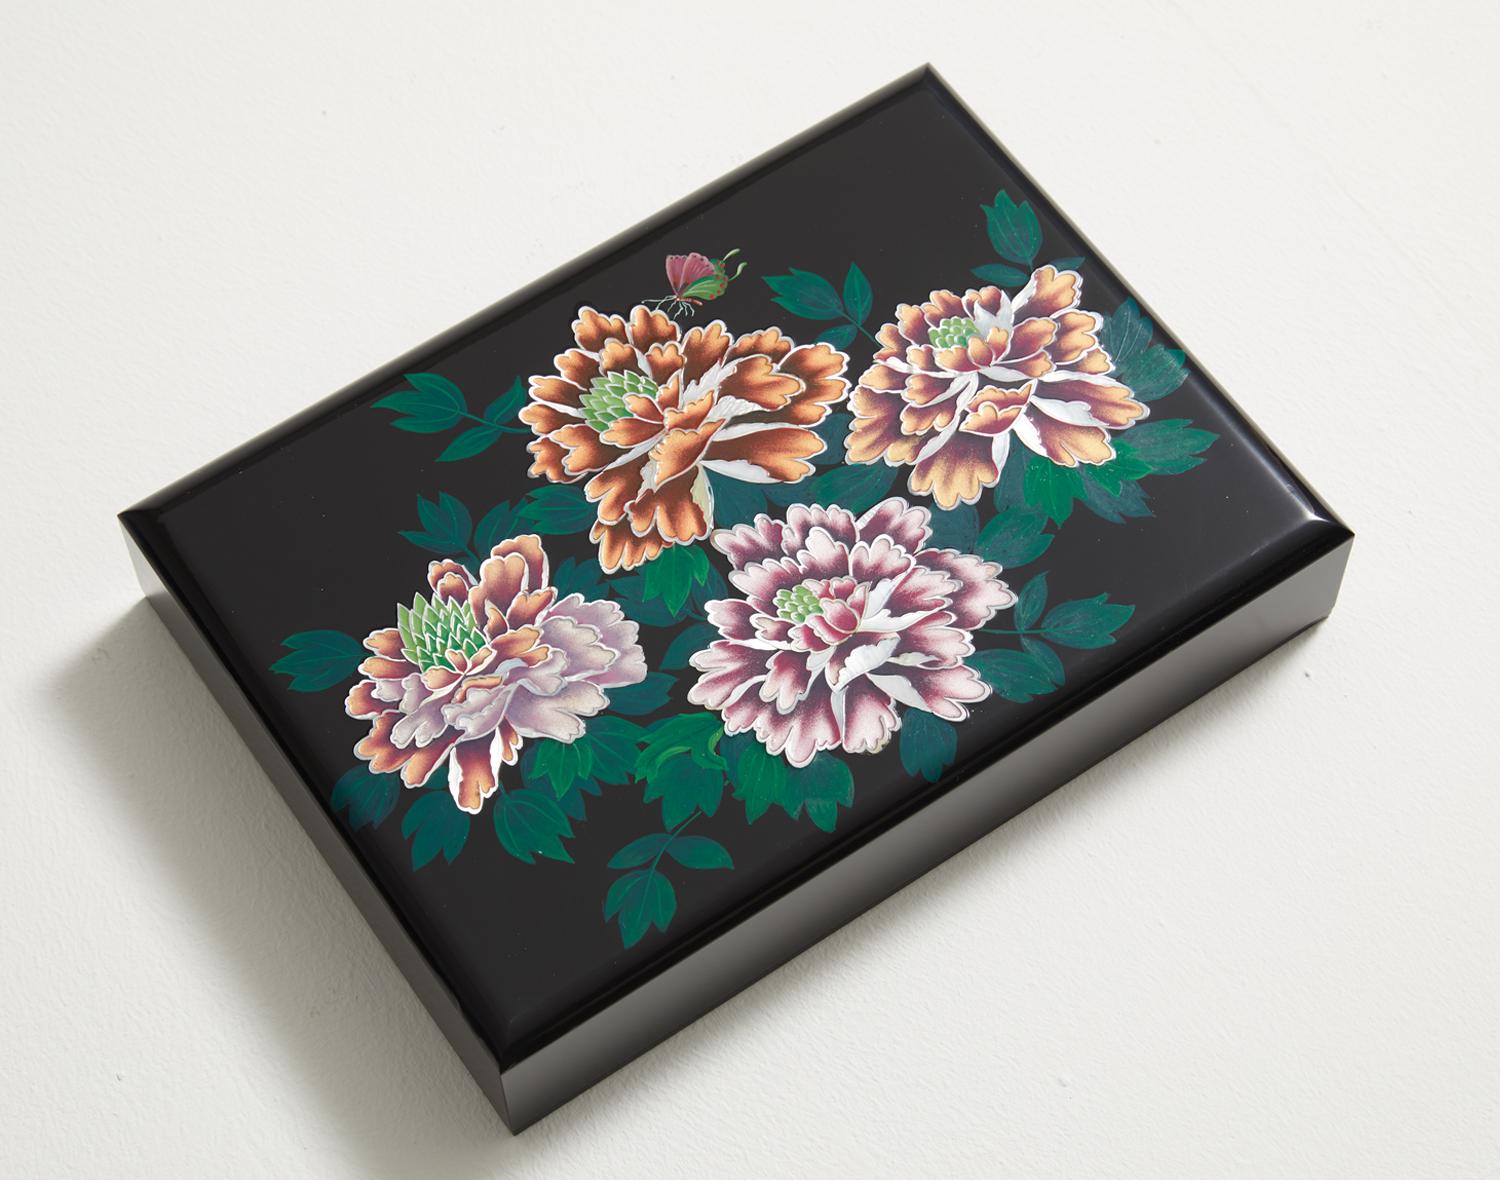 This artwork adopts mother of pearl and lacquer to portray peony blossoms, also known as the king of all flowers and a symbol for beautiful women. The lustrous mother of pearl was used to create such sumptuous flower patterns. The colors inside the